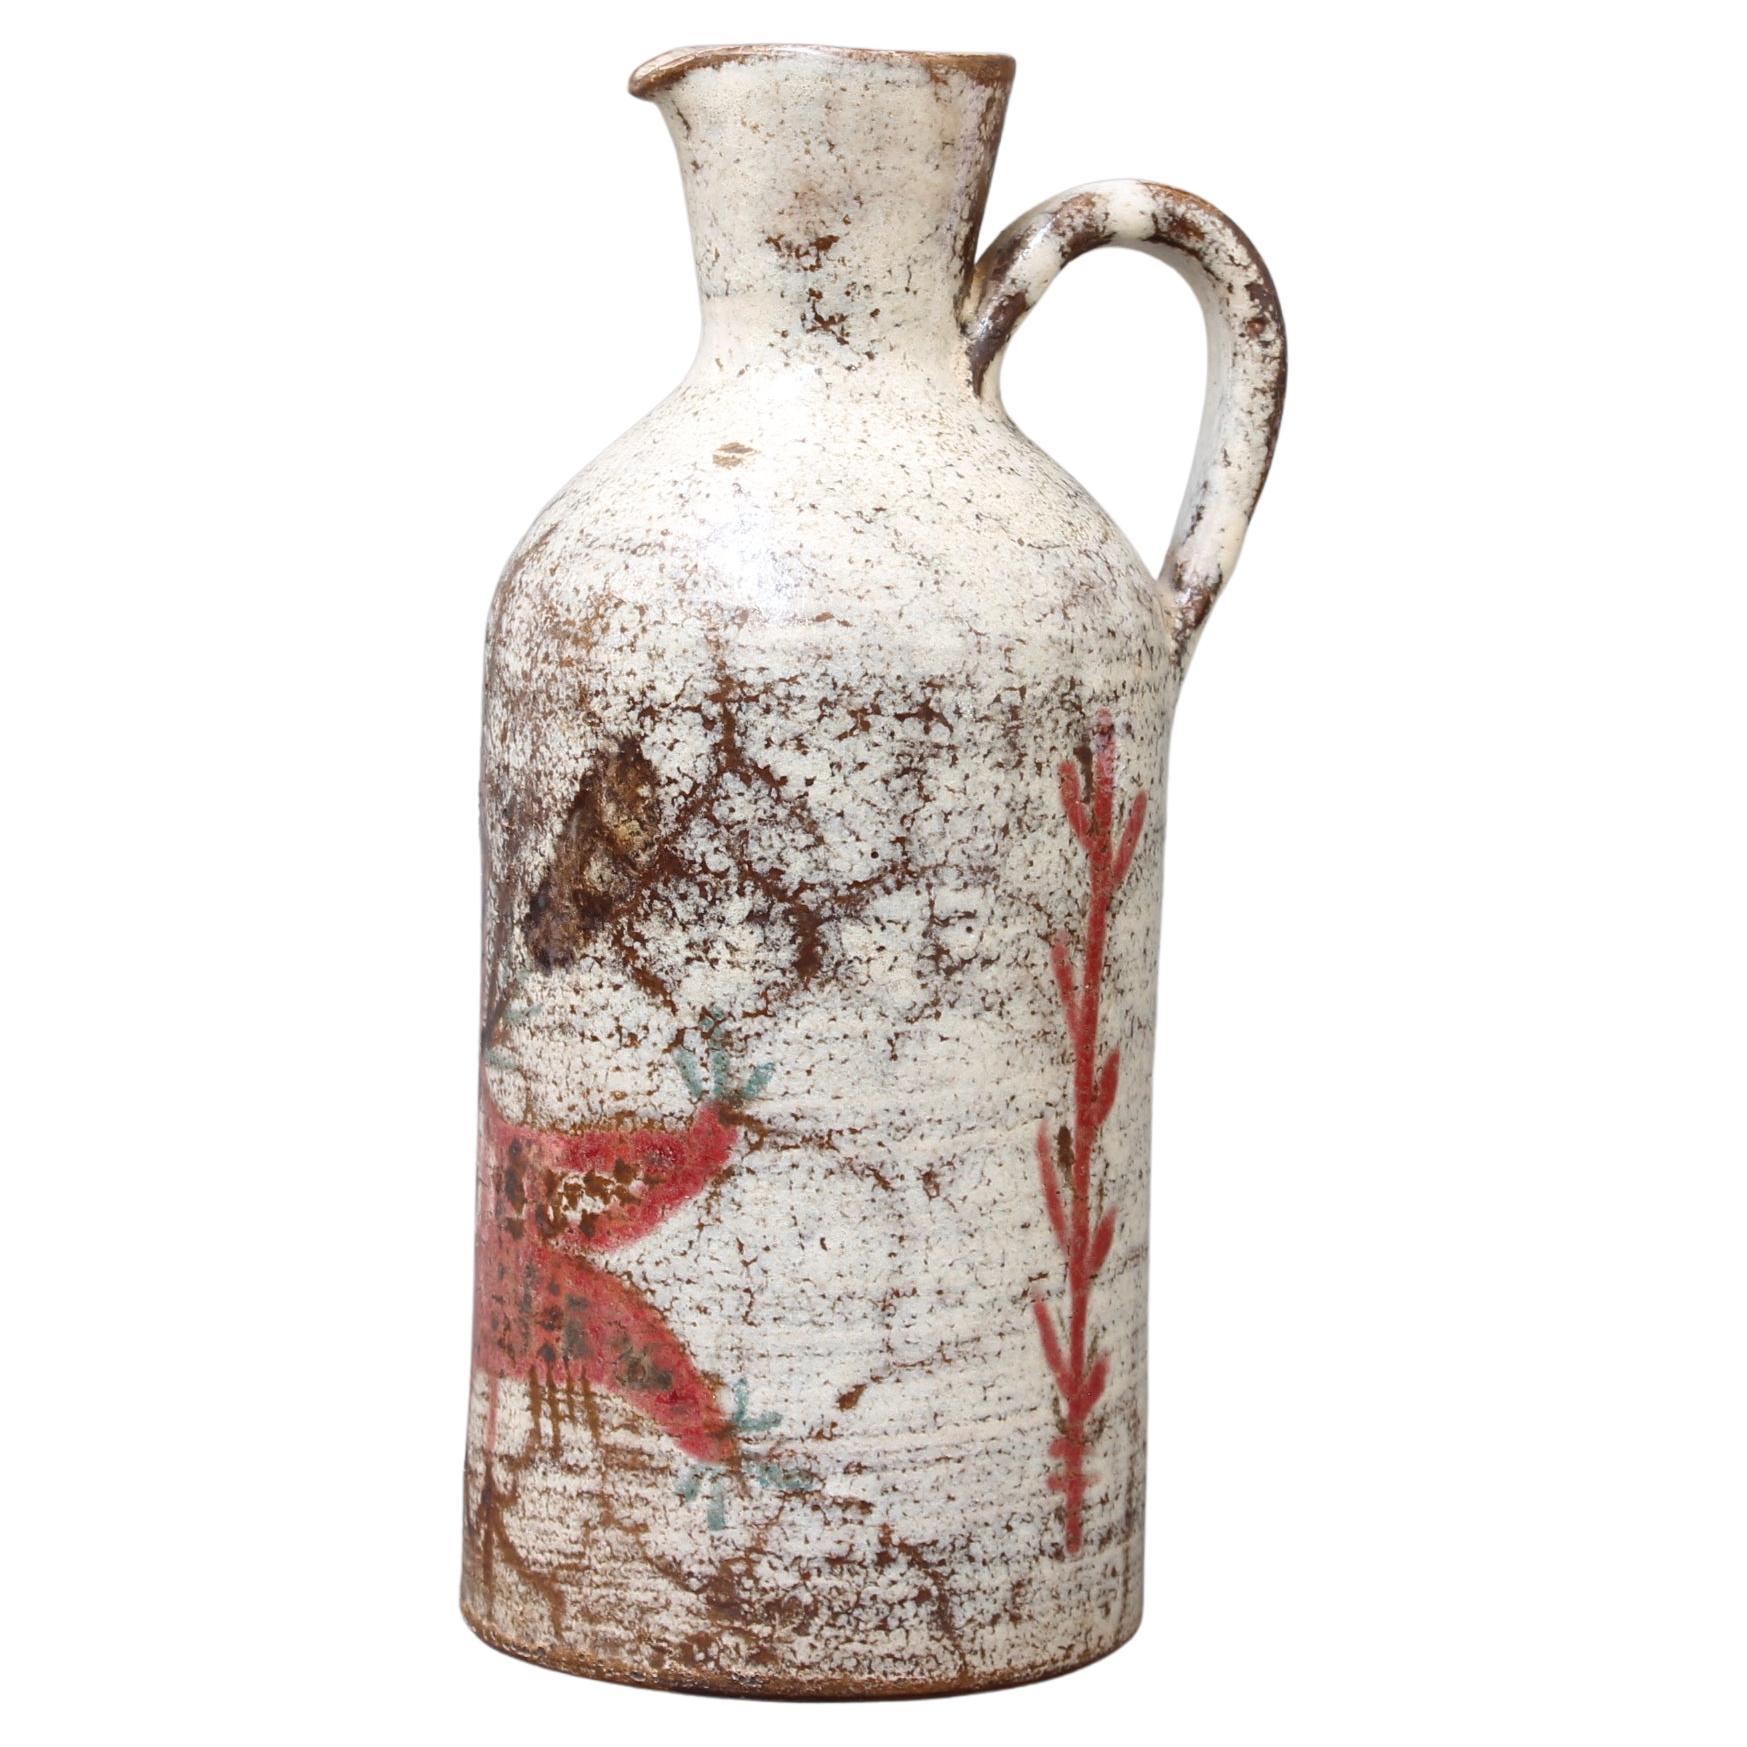 Vintage French ceramic jug by Le Mûrier (circa 1960s). A delightful ceramic piece with curved handle and a spout with lip. A creamy white lustrous glaze with brown patches form the base of the piece complemented by a red stylised bird and